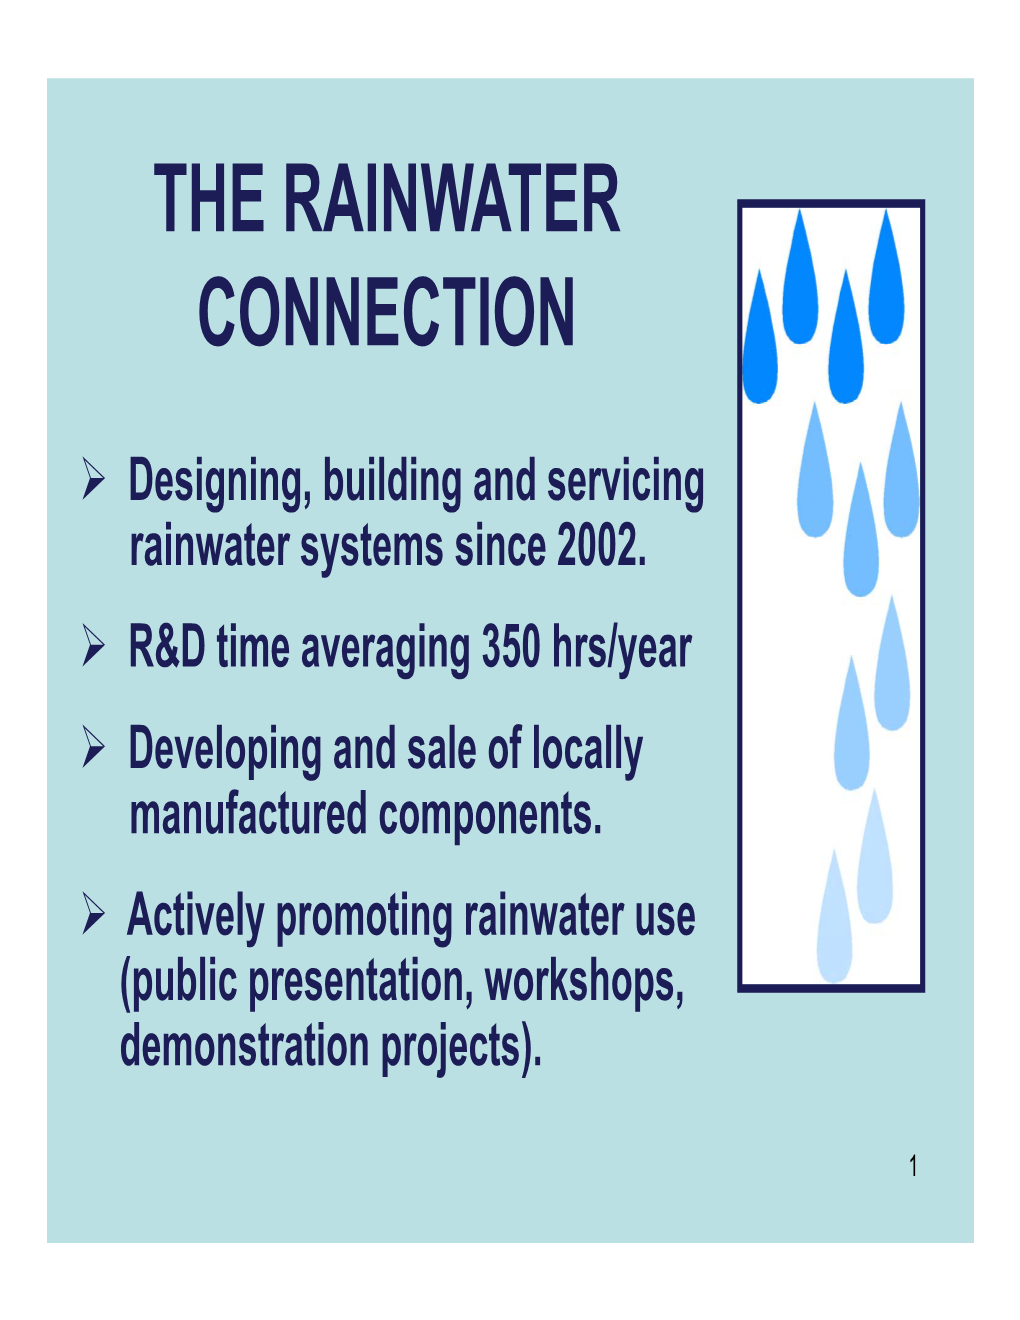 The Rainwater Connection